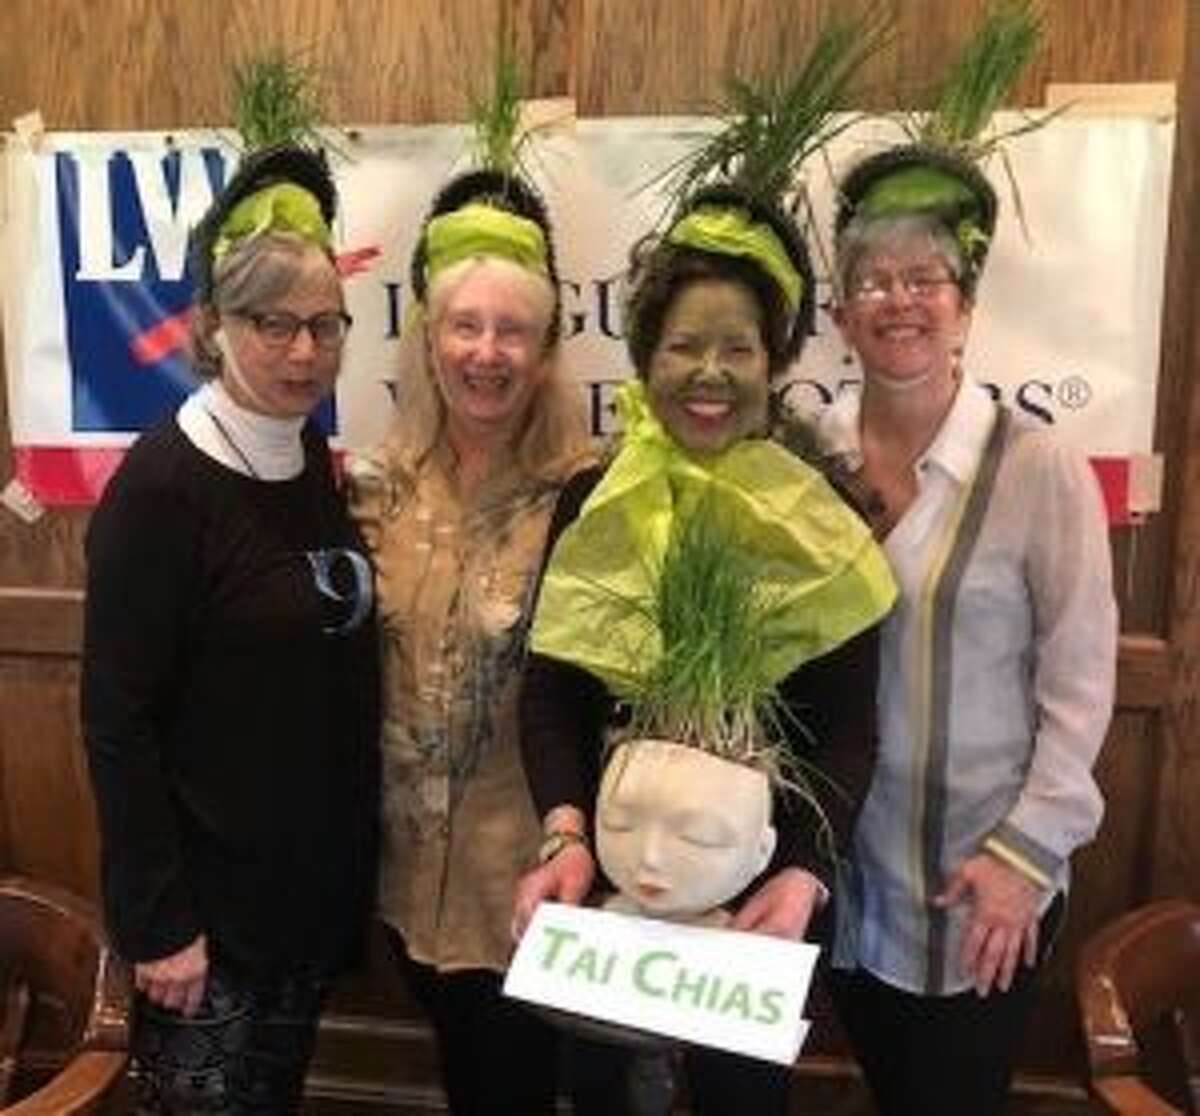 Tai Chias-Chia Pets won Best Costume during the Pictionary Olympics on April 26 at the Manistee Golf and Country Club. The event is a fundraiser for the League of Women Voters Manistee County. Pictured are team members Gail Tooley, Peg Connor, Mary Marshall and Julia Davidson. (Courtesy photo)